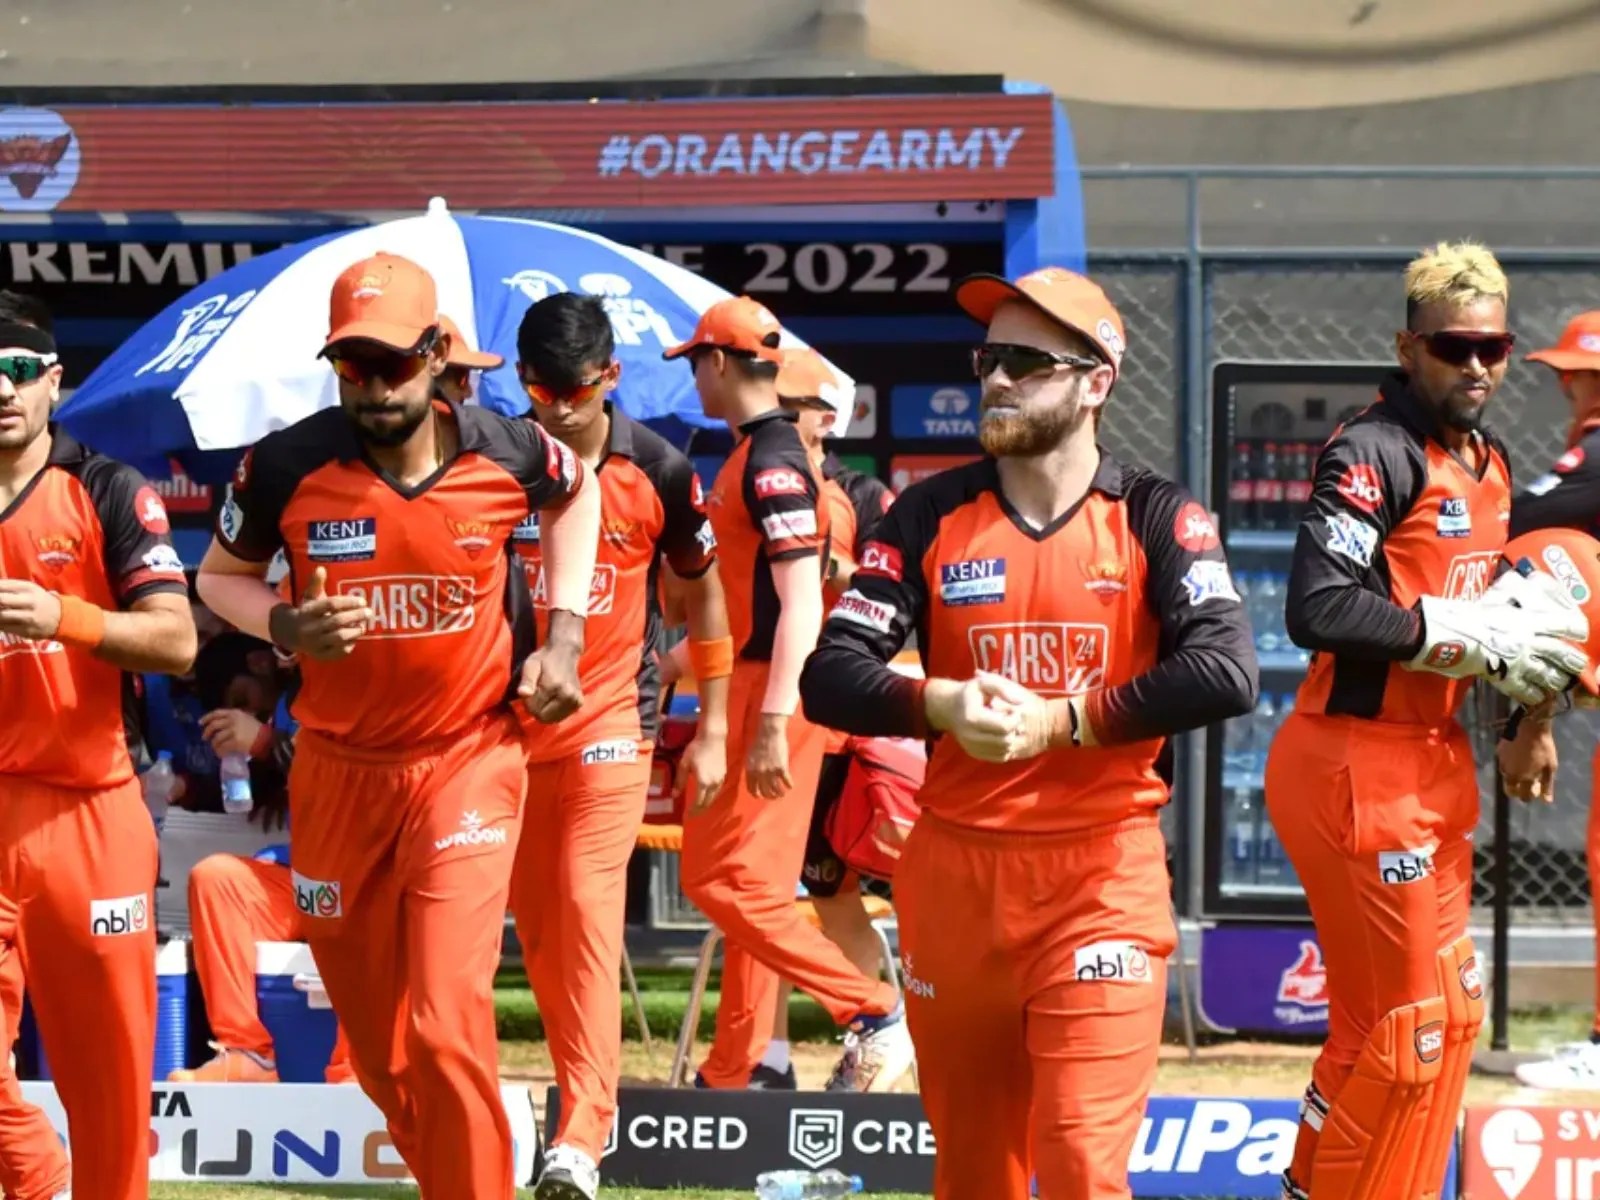 IPL 2023: NZ skipper Kane Williamson reminisces 'fun time and memories' with Sunrisers Hyderabad after getting released - CHECK out